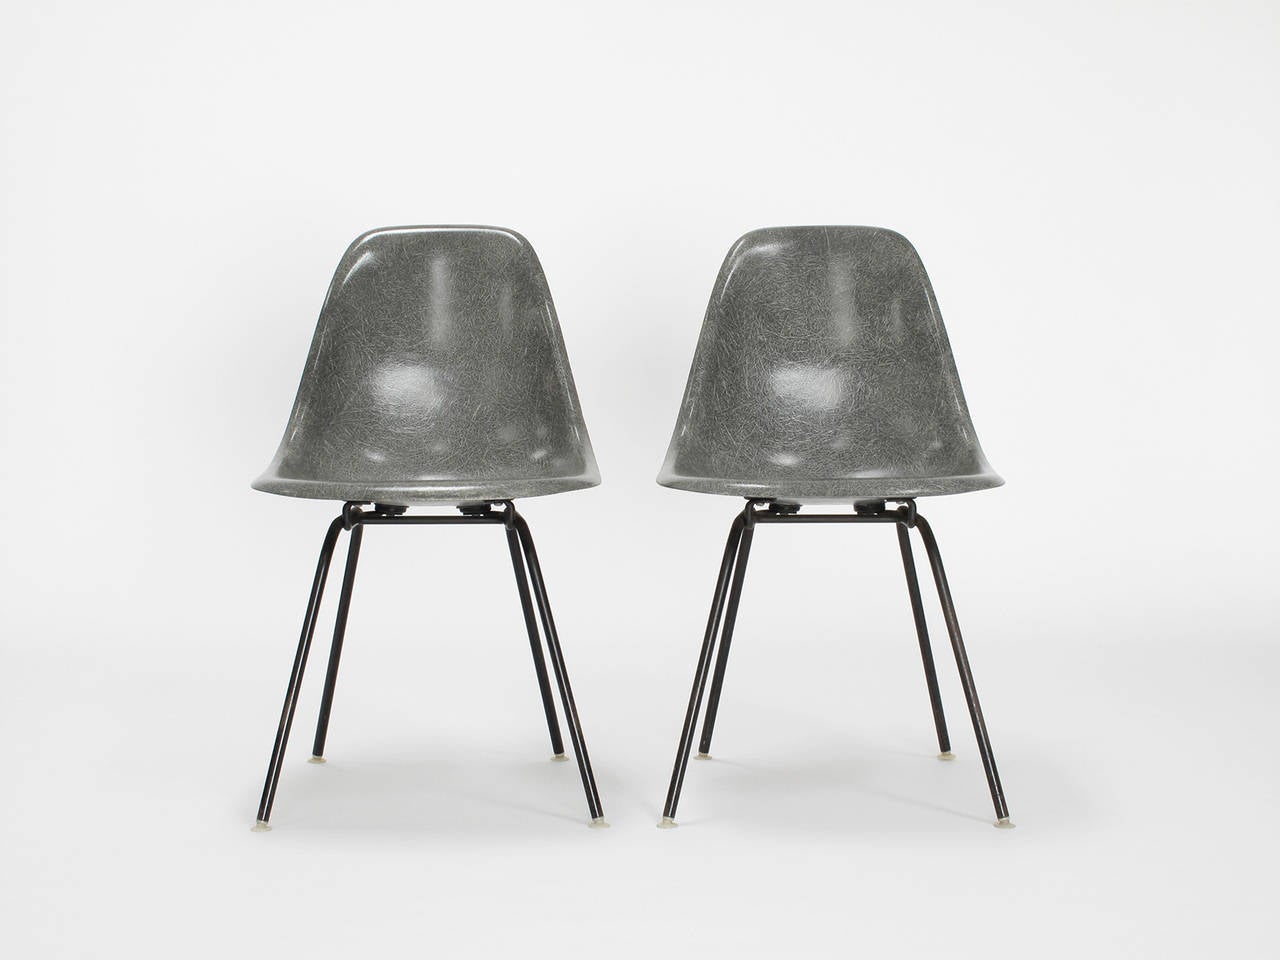 Pair of Charles and Ray Eames Fiberglass 'Shell' Chairs, 1960s In Excellent Condition For Sale In Los Angeles, CA